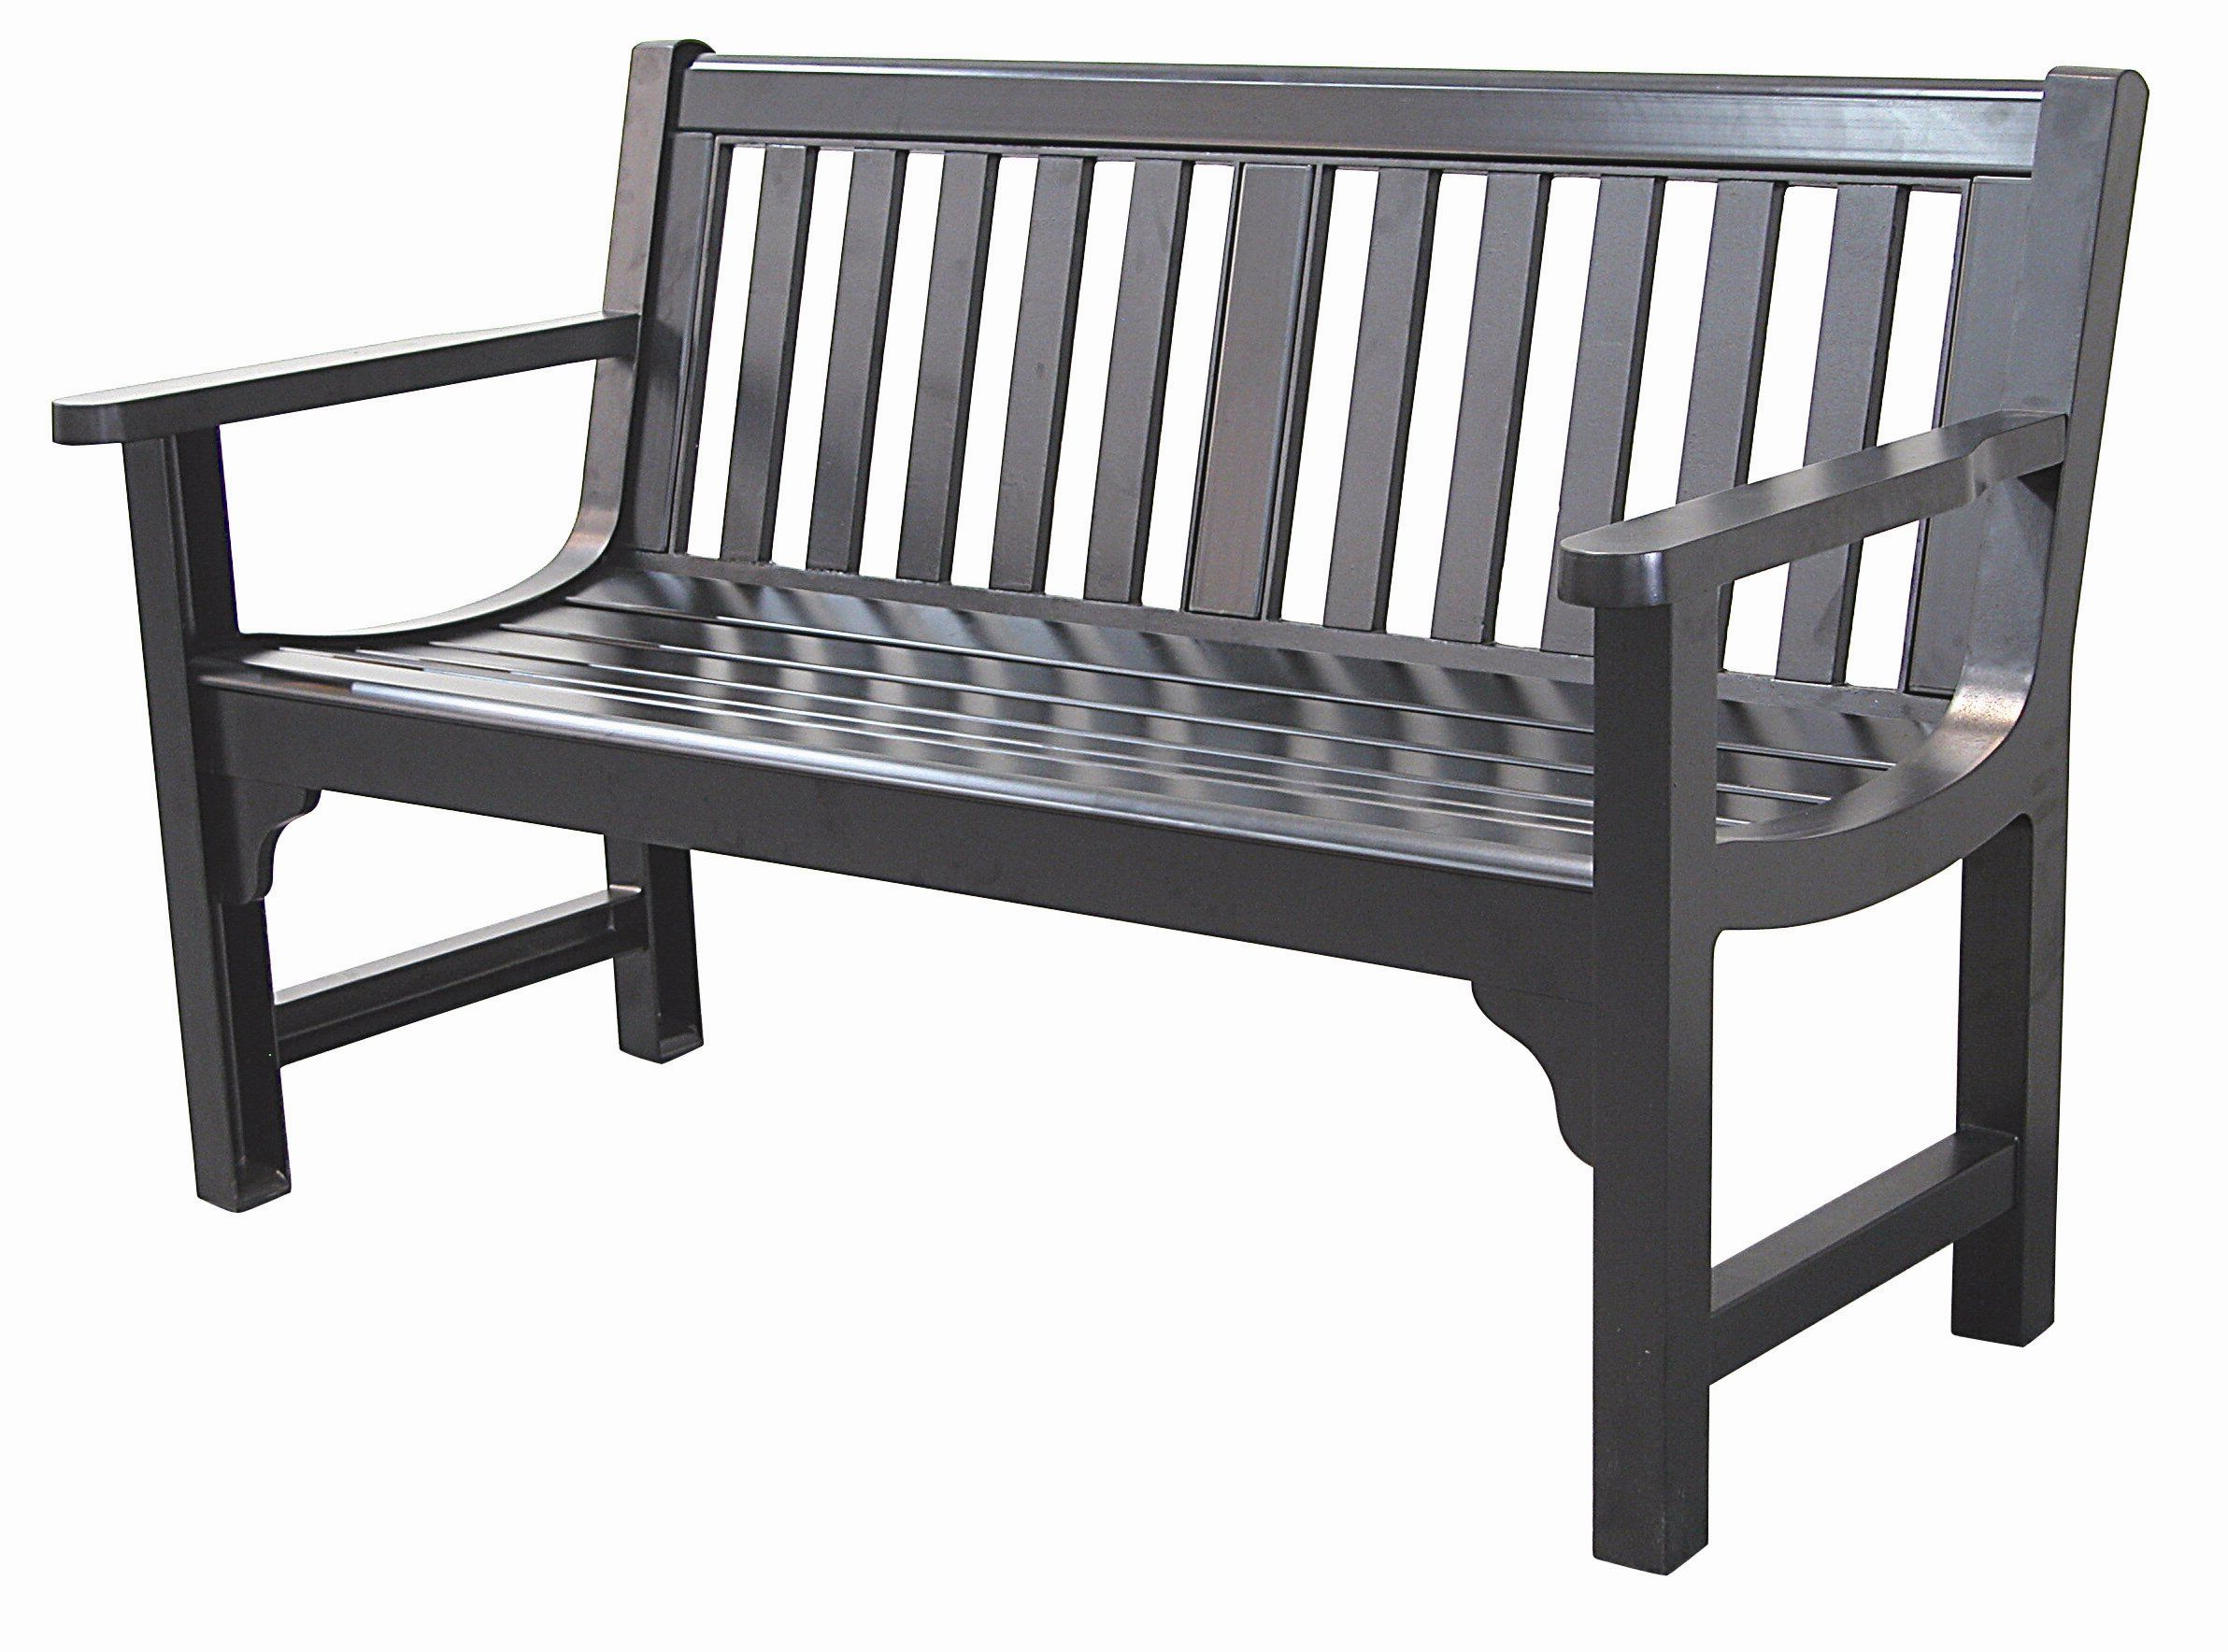 Heslin Steel Park Benches Inside Widely Used Alvah Slatted Cast Iron And Tubular Steel Garden Bench (View 5 of 30)